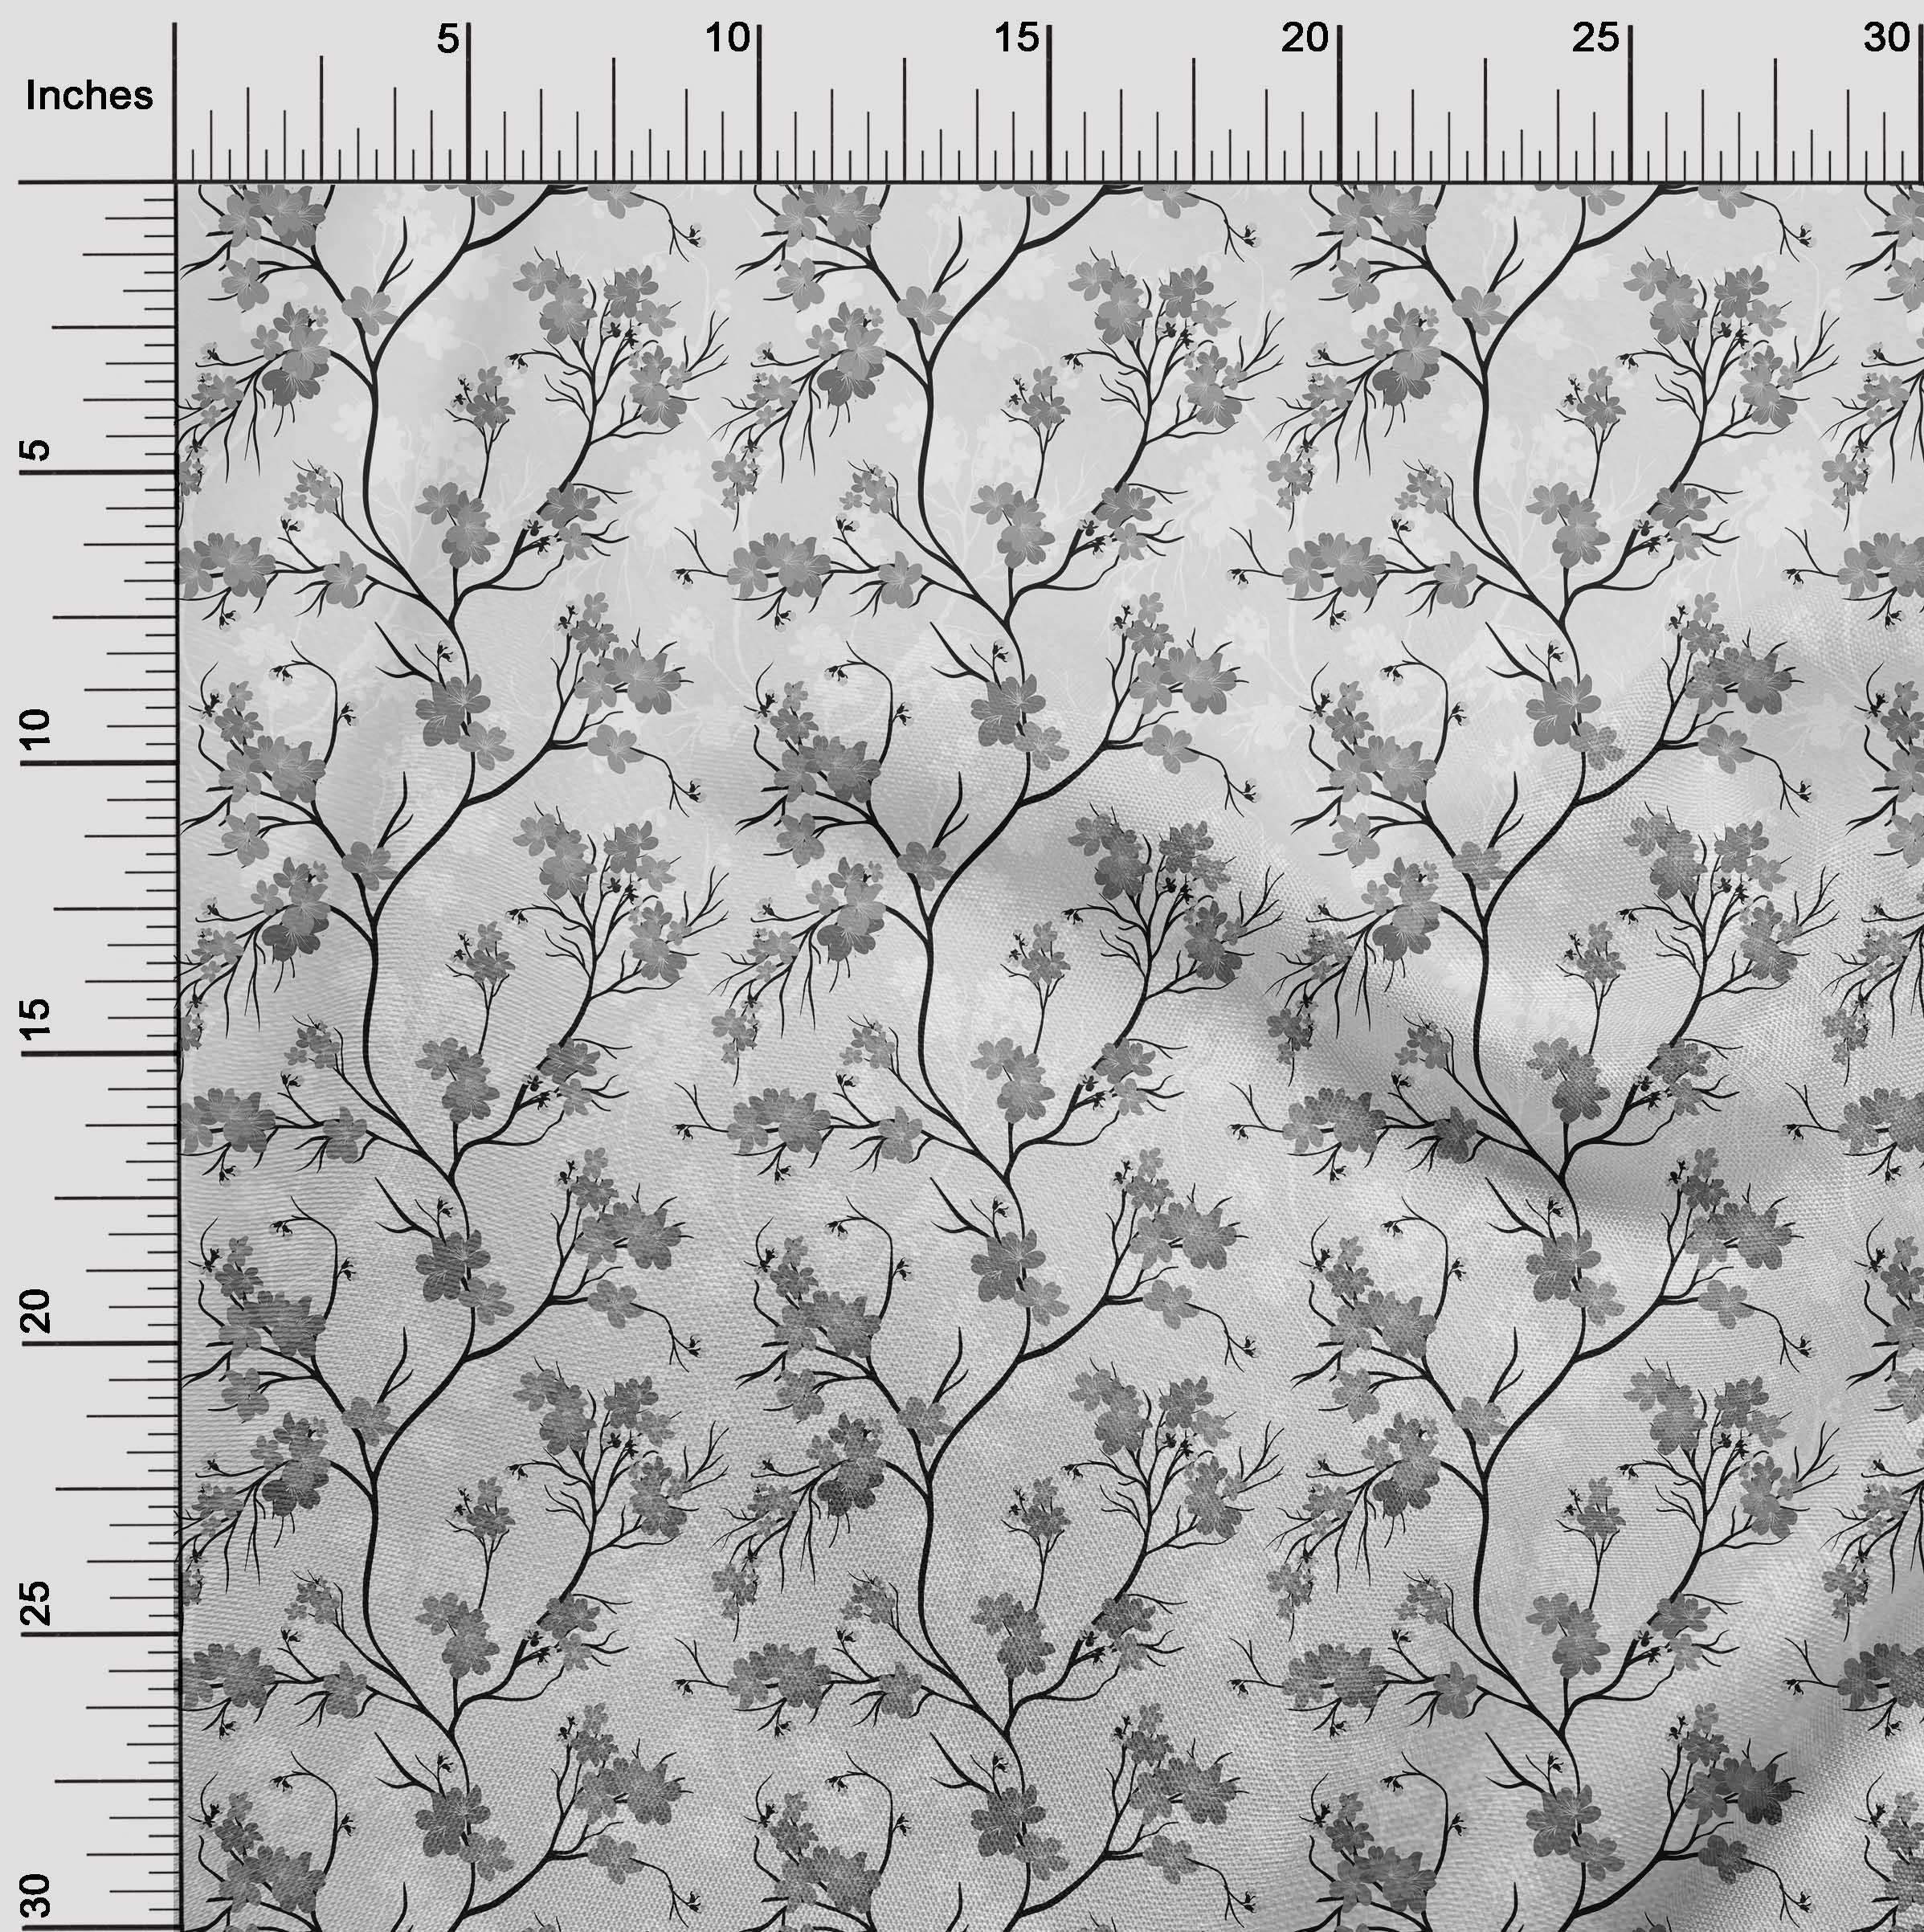 oneOone Polyester Spandex Gray Fabric Floral Sewing Material Print Fabric By The Yard 56 Inch Wide - image 3 of 5